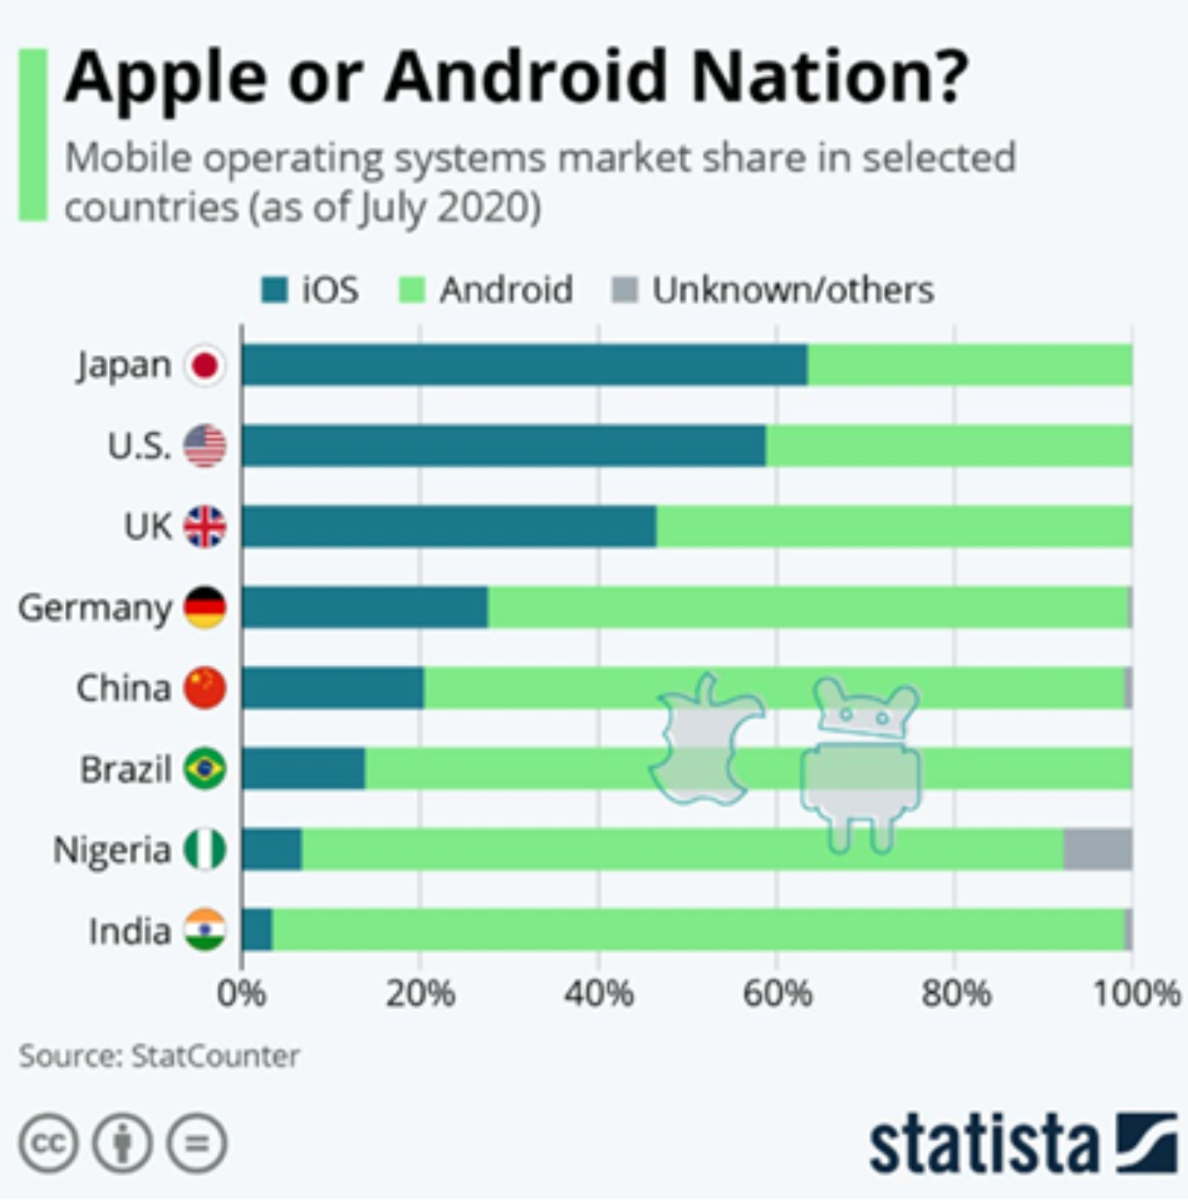 Apple or Android Nation?